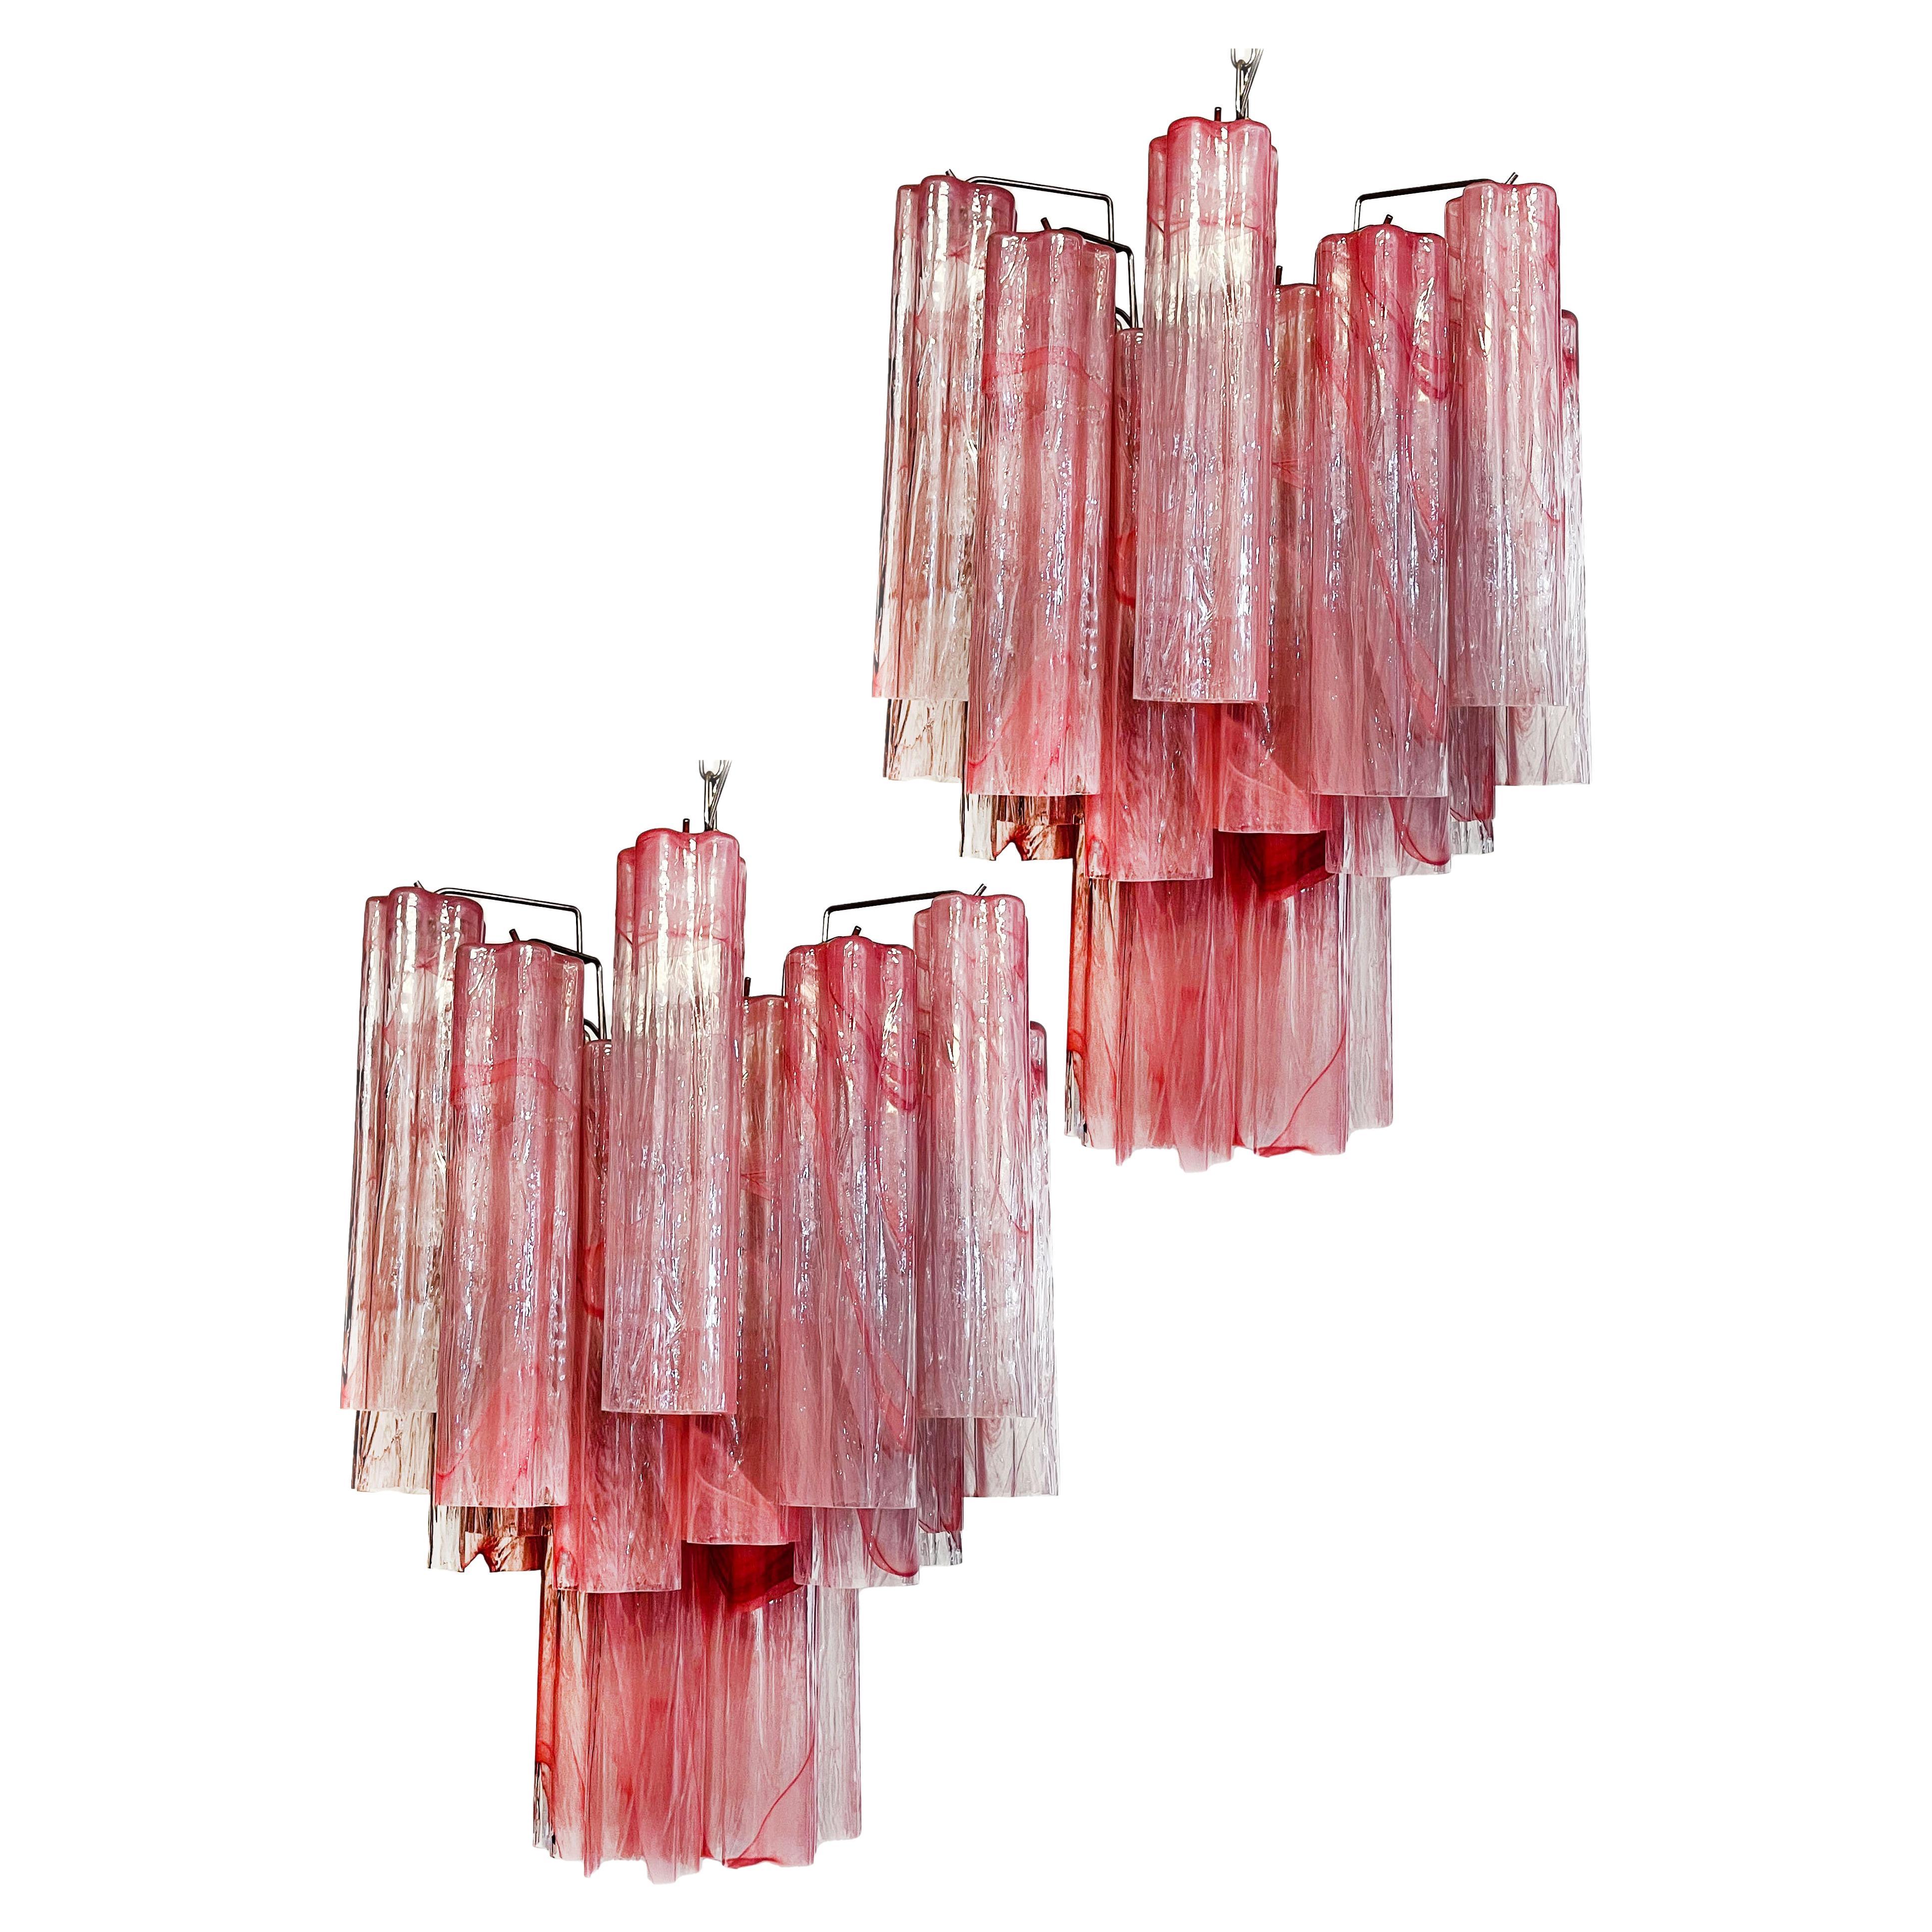 Charming Glass Tube Chandeliers, 30 Albaster Pink Glasses For Sale